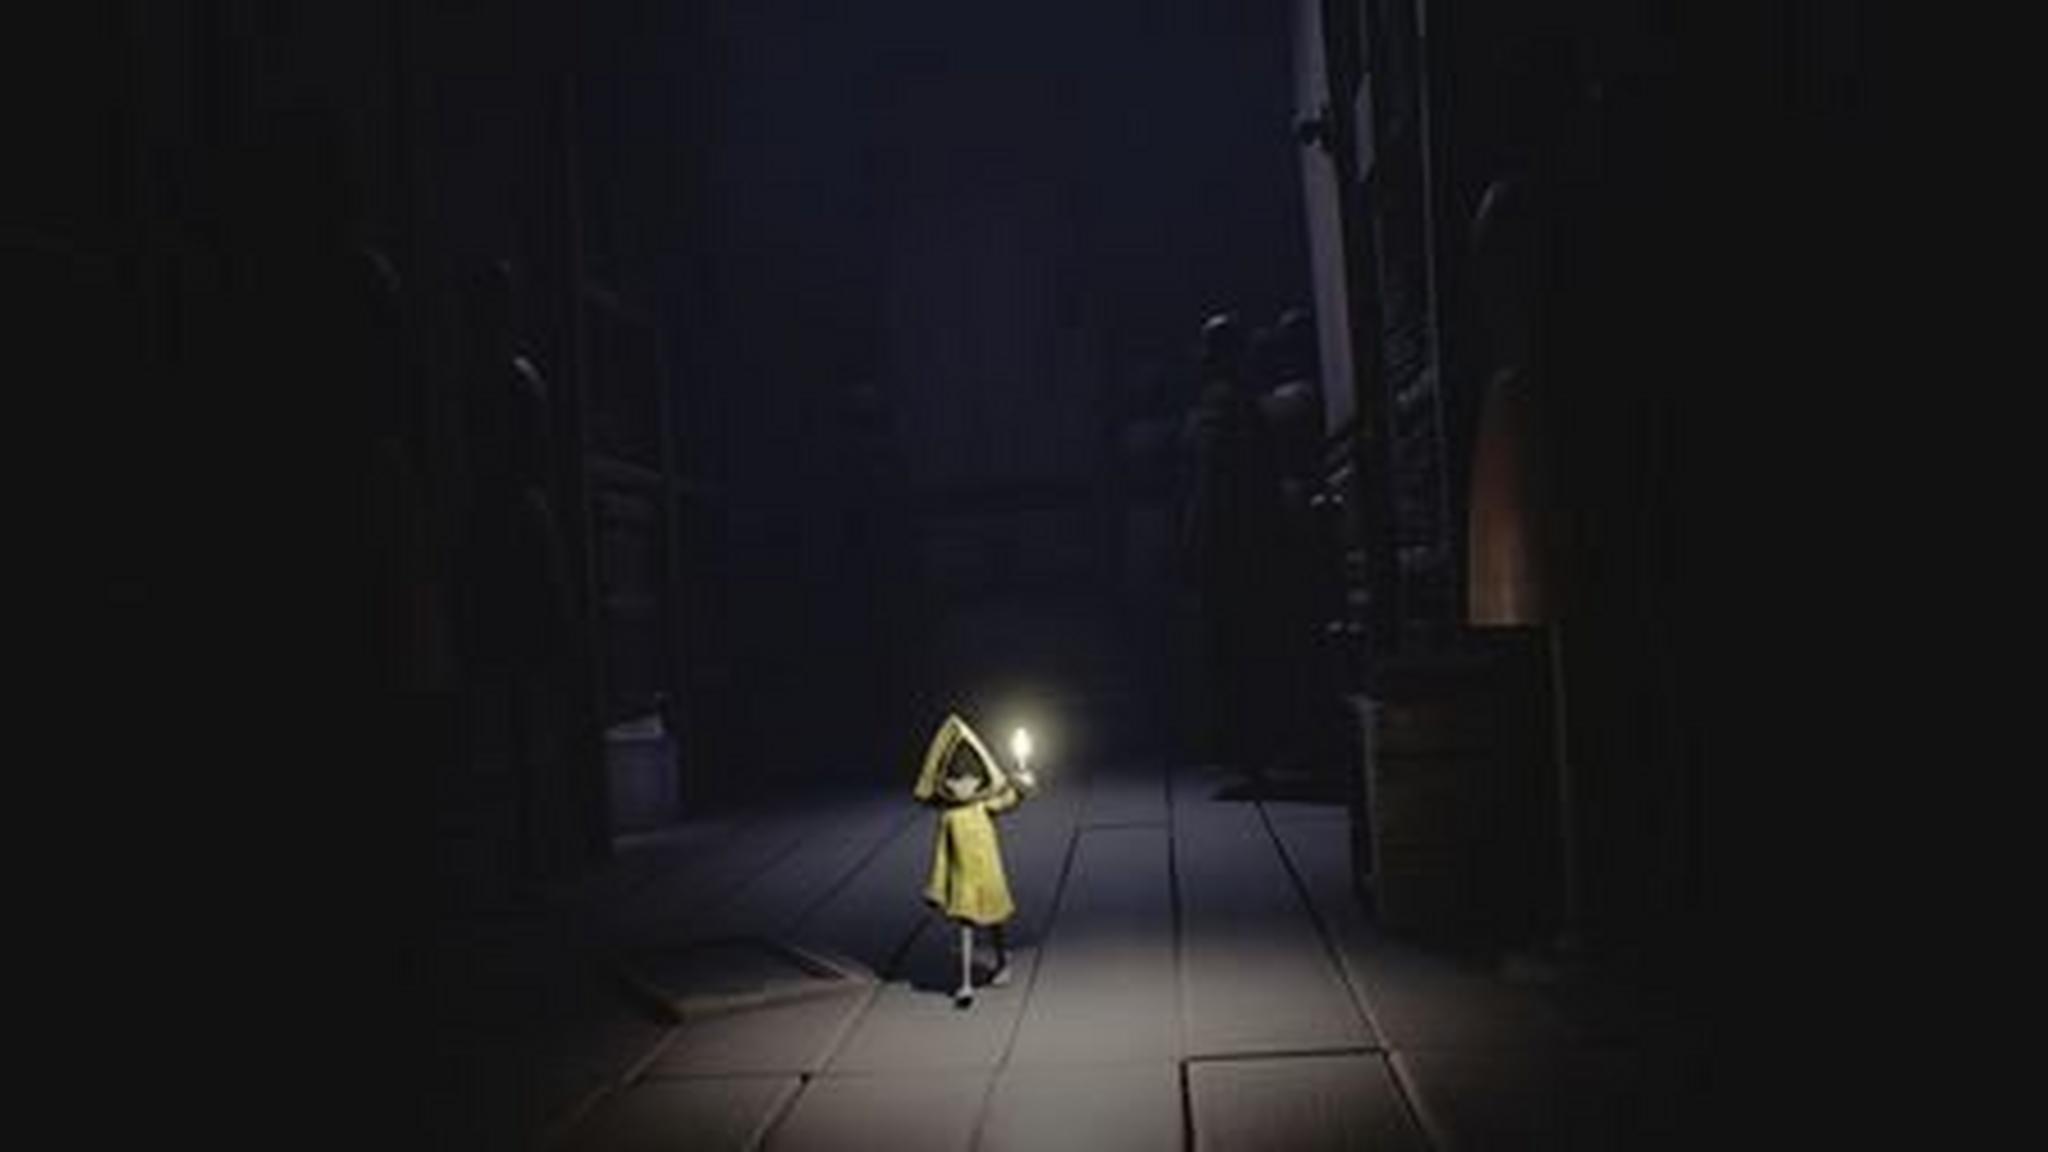 Little Nightmares 1 & 2 - PlayStation 4 Game